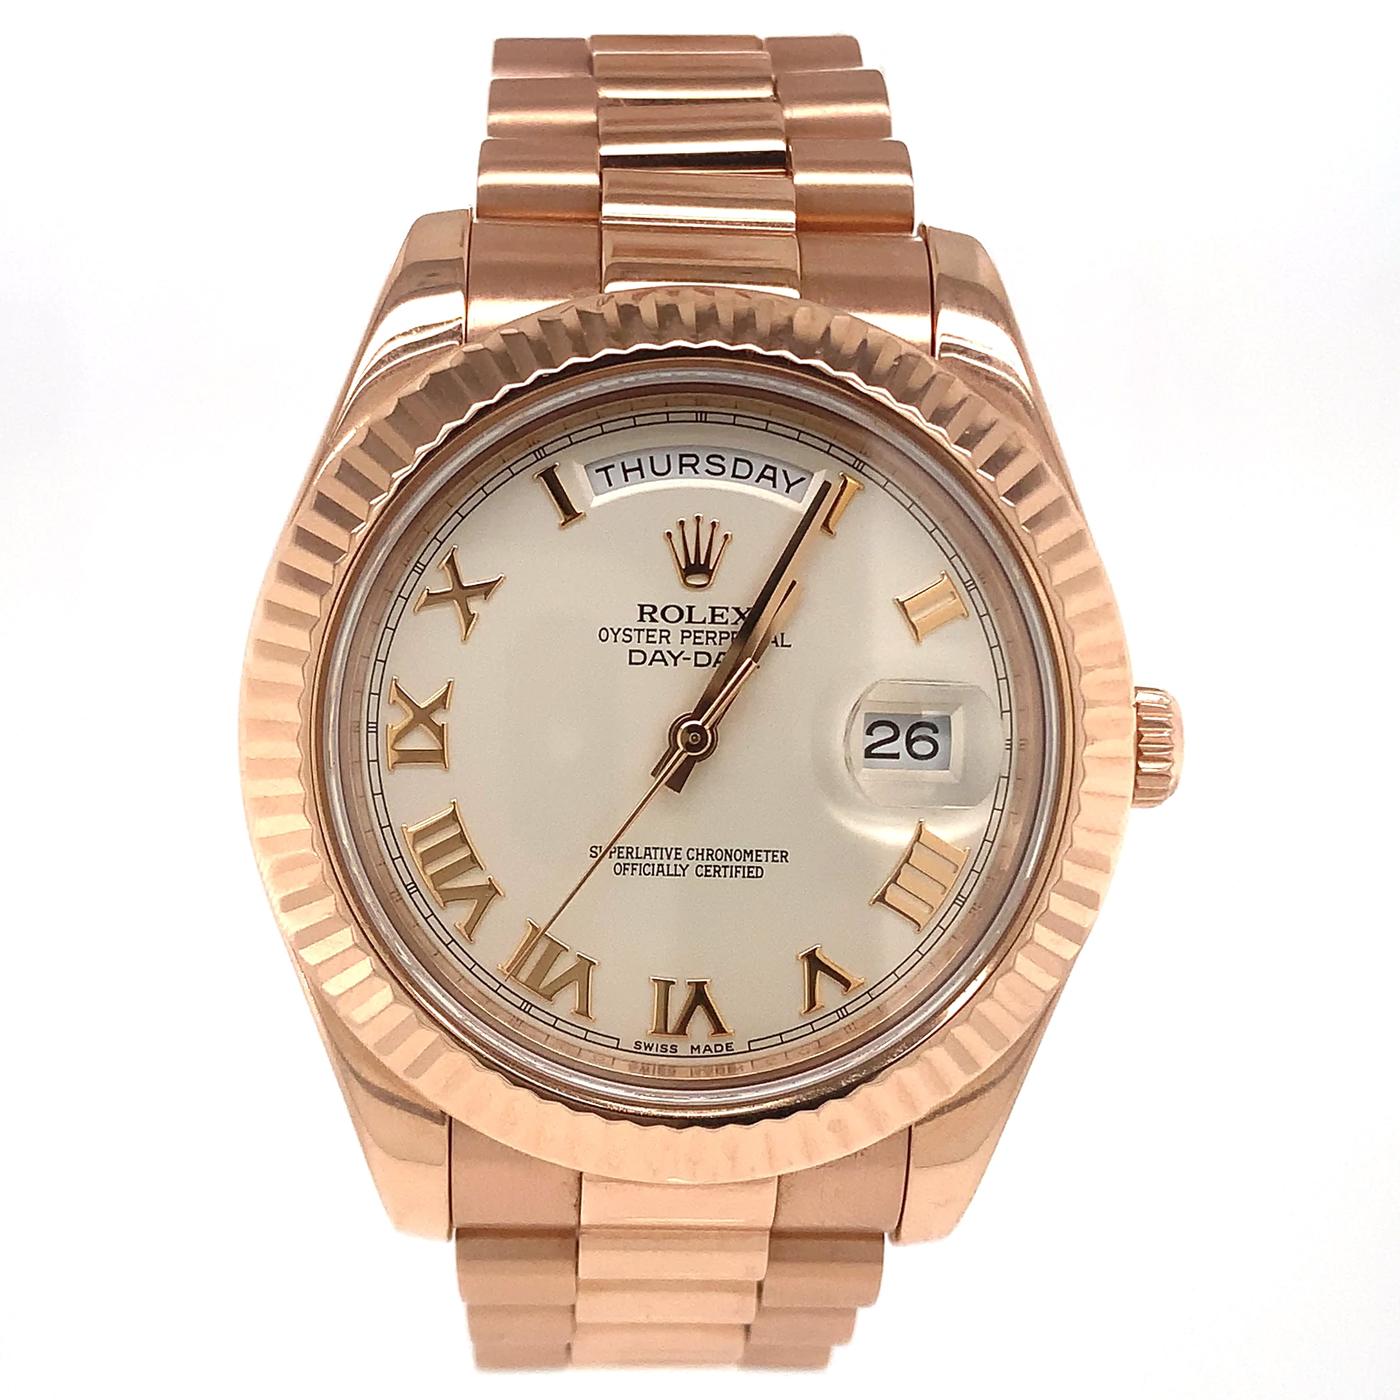 The Oyster Perpetual Day-Date II 41mm in 18 ct Everose gold with chocolate, fluted bezel, and a President bracelet. The Day-Date was the first watch to indicate the day of the week spelled out in full when it was first presented in 1956. It is